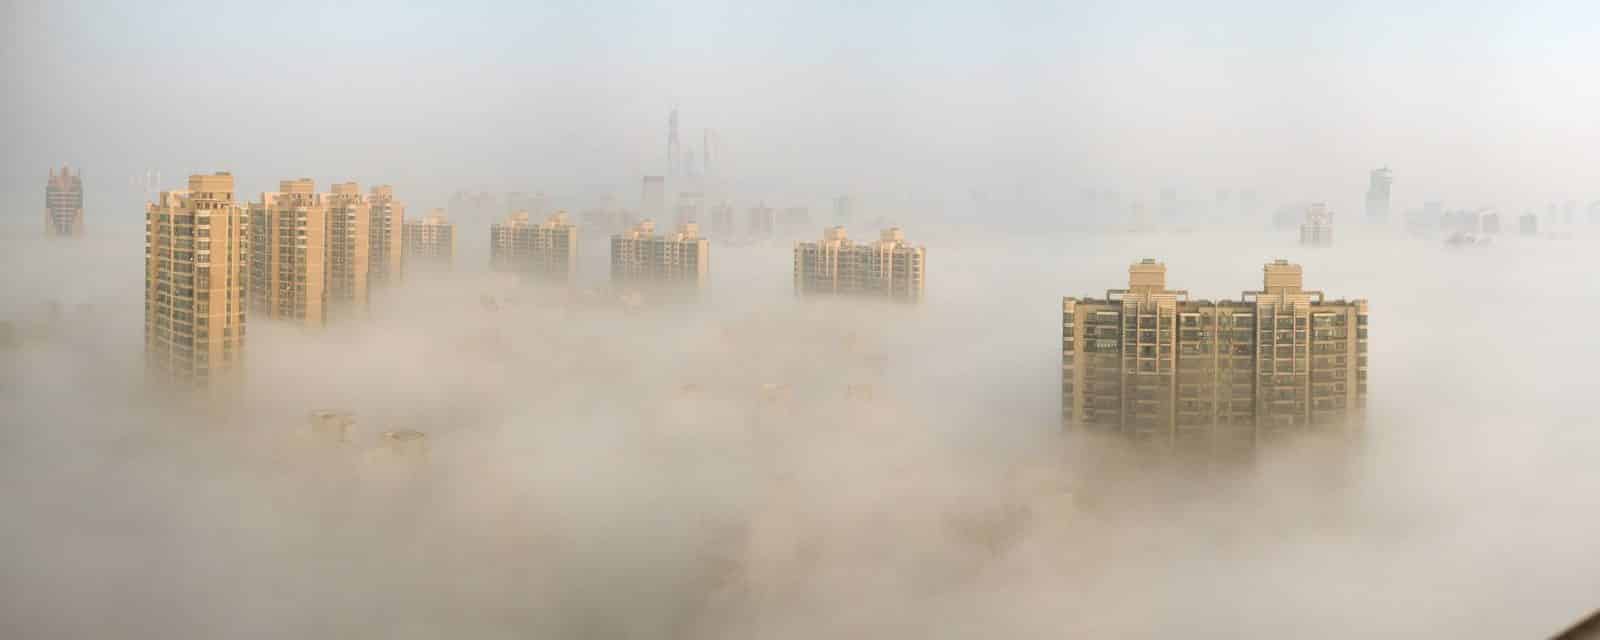 Smog Chiny Fot. leniners